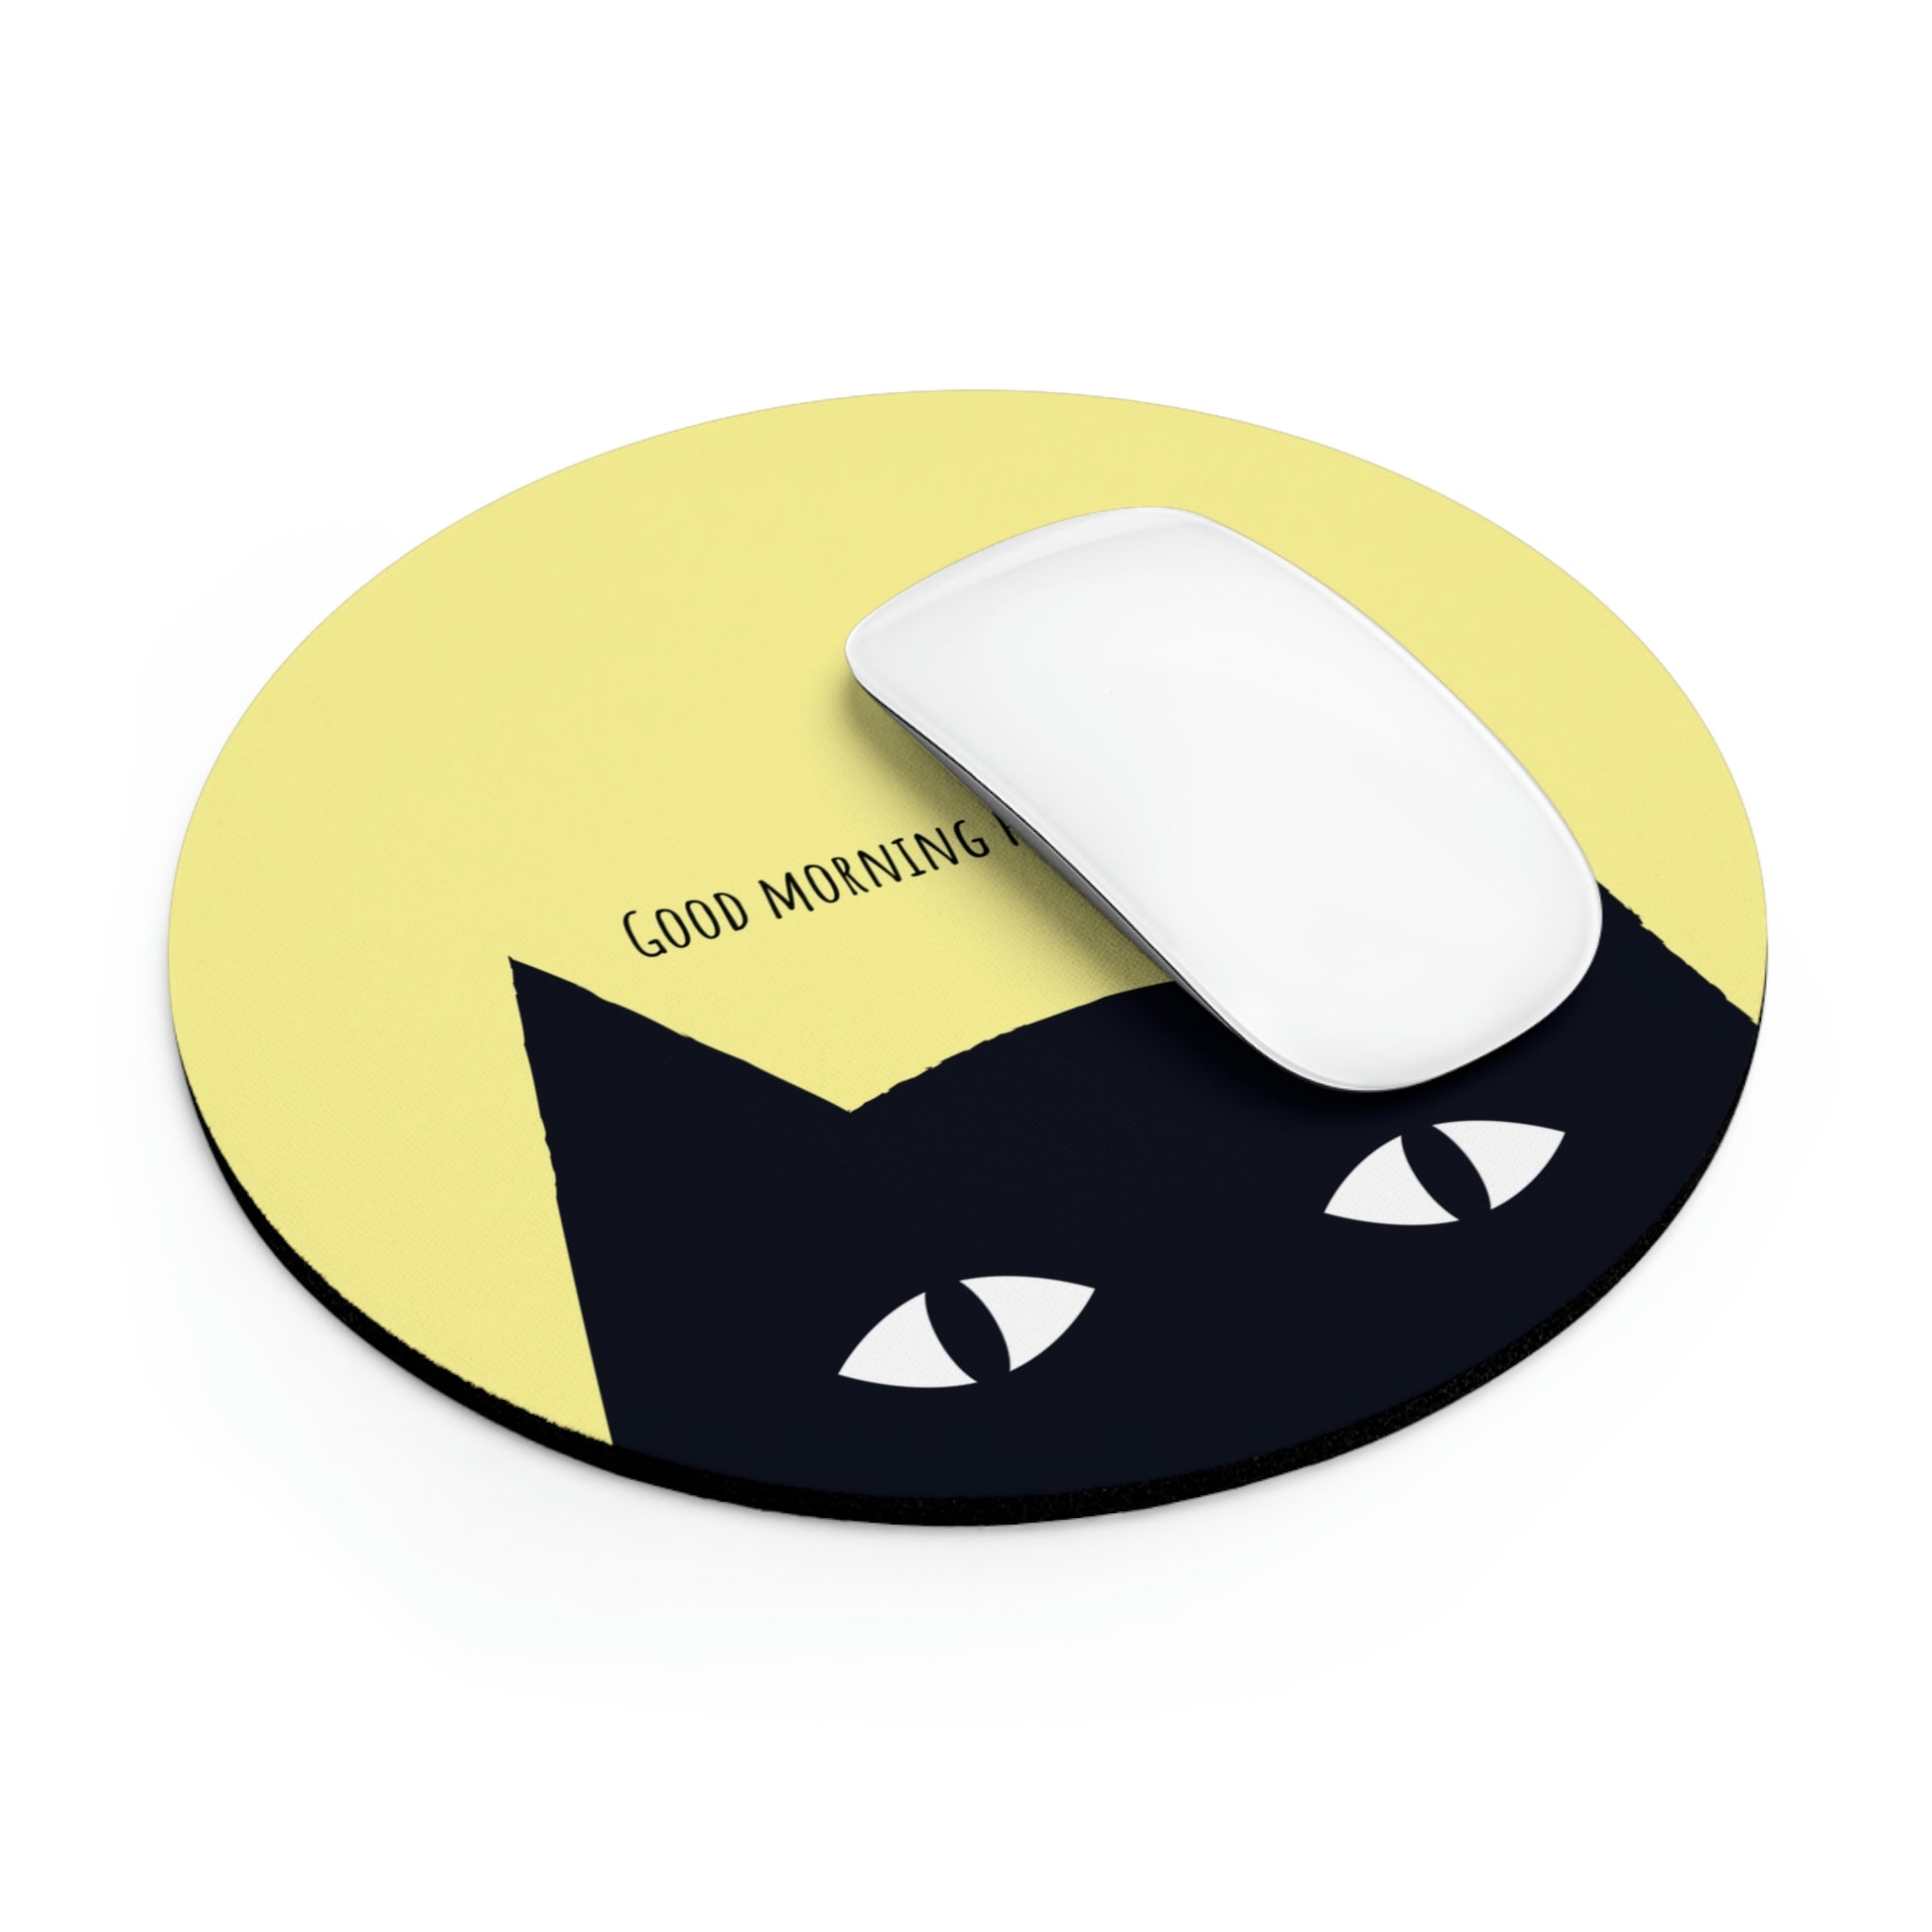 Black Cat says Good Morning Human yellow Mouse Pad, funny mouse pad, cat lover gift, cute mouse pad, desk accessories, coworker gift